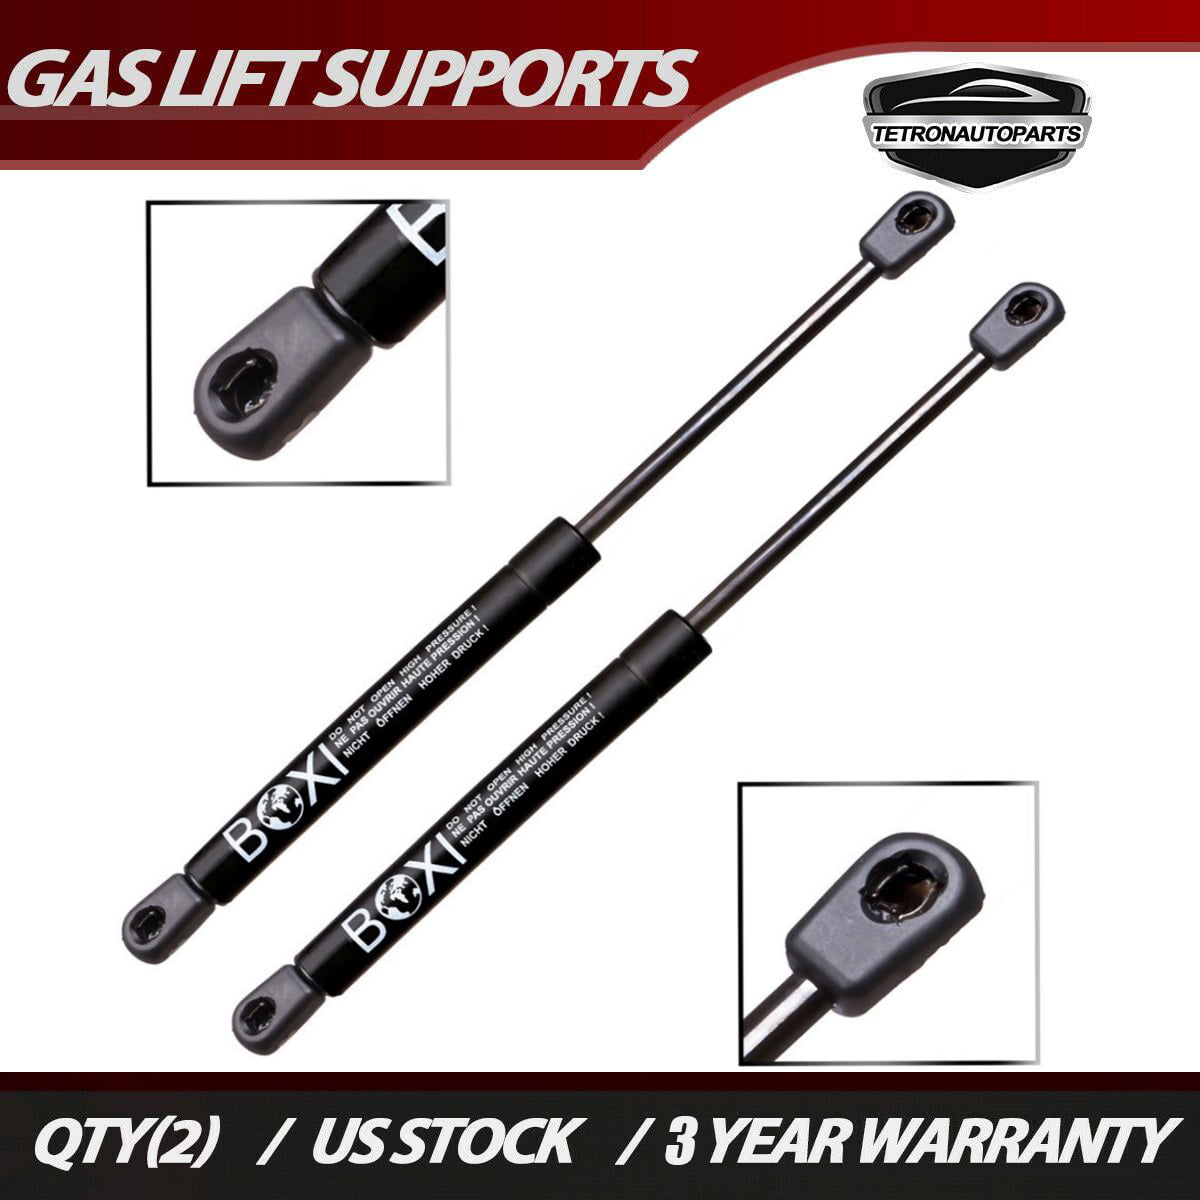 2x Front Hood Lift Supports Damper Prop Rod Arm for Jeep Liberty KJ 02-07 4366